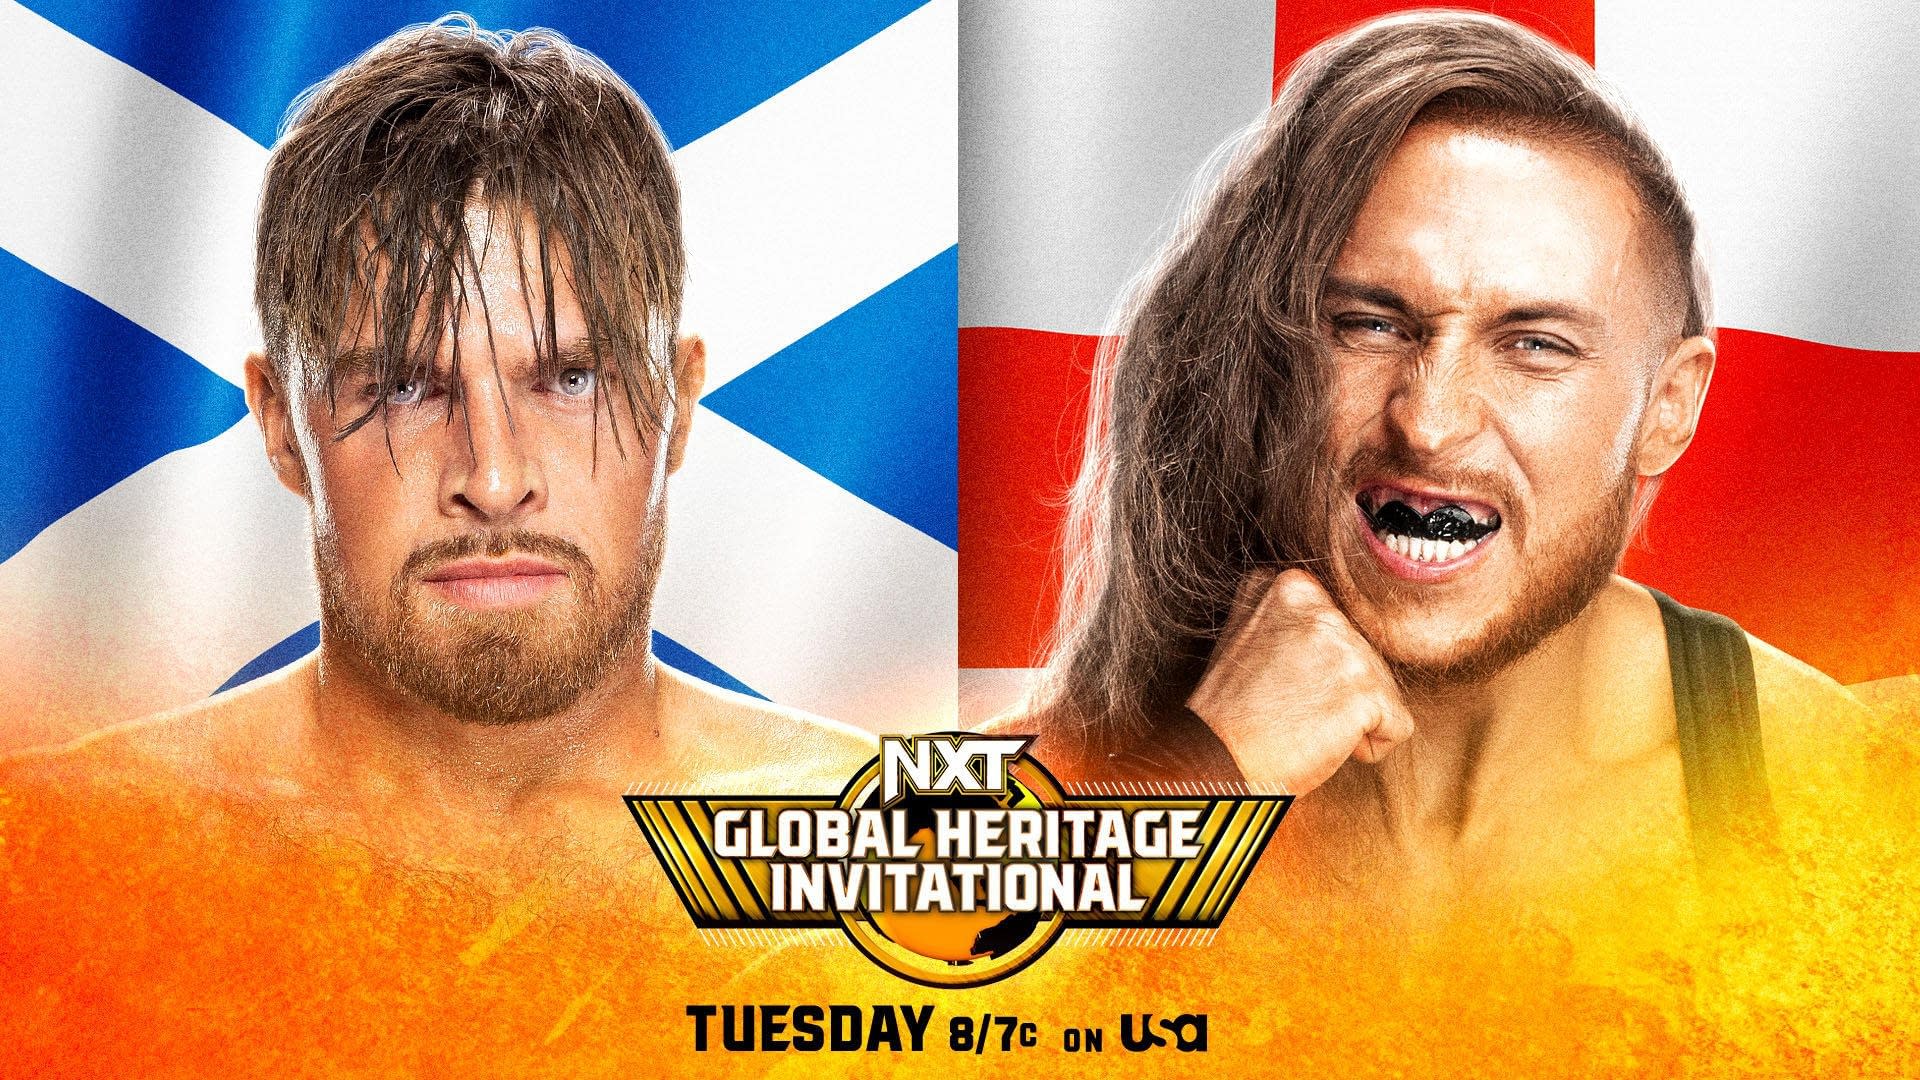 WWE NXT Preview The Global Heritage Invitational Finals Tonight